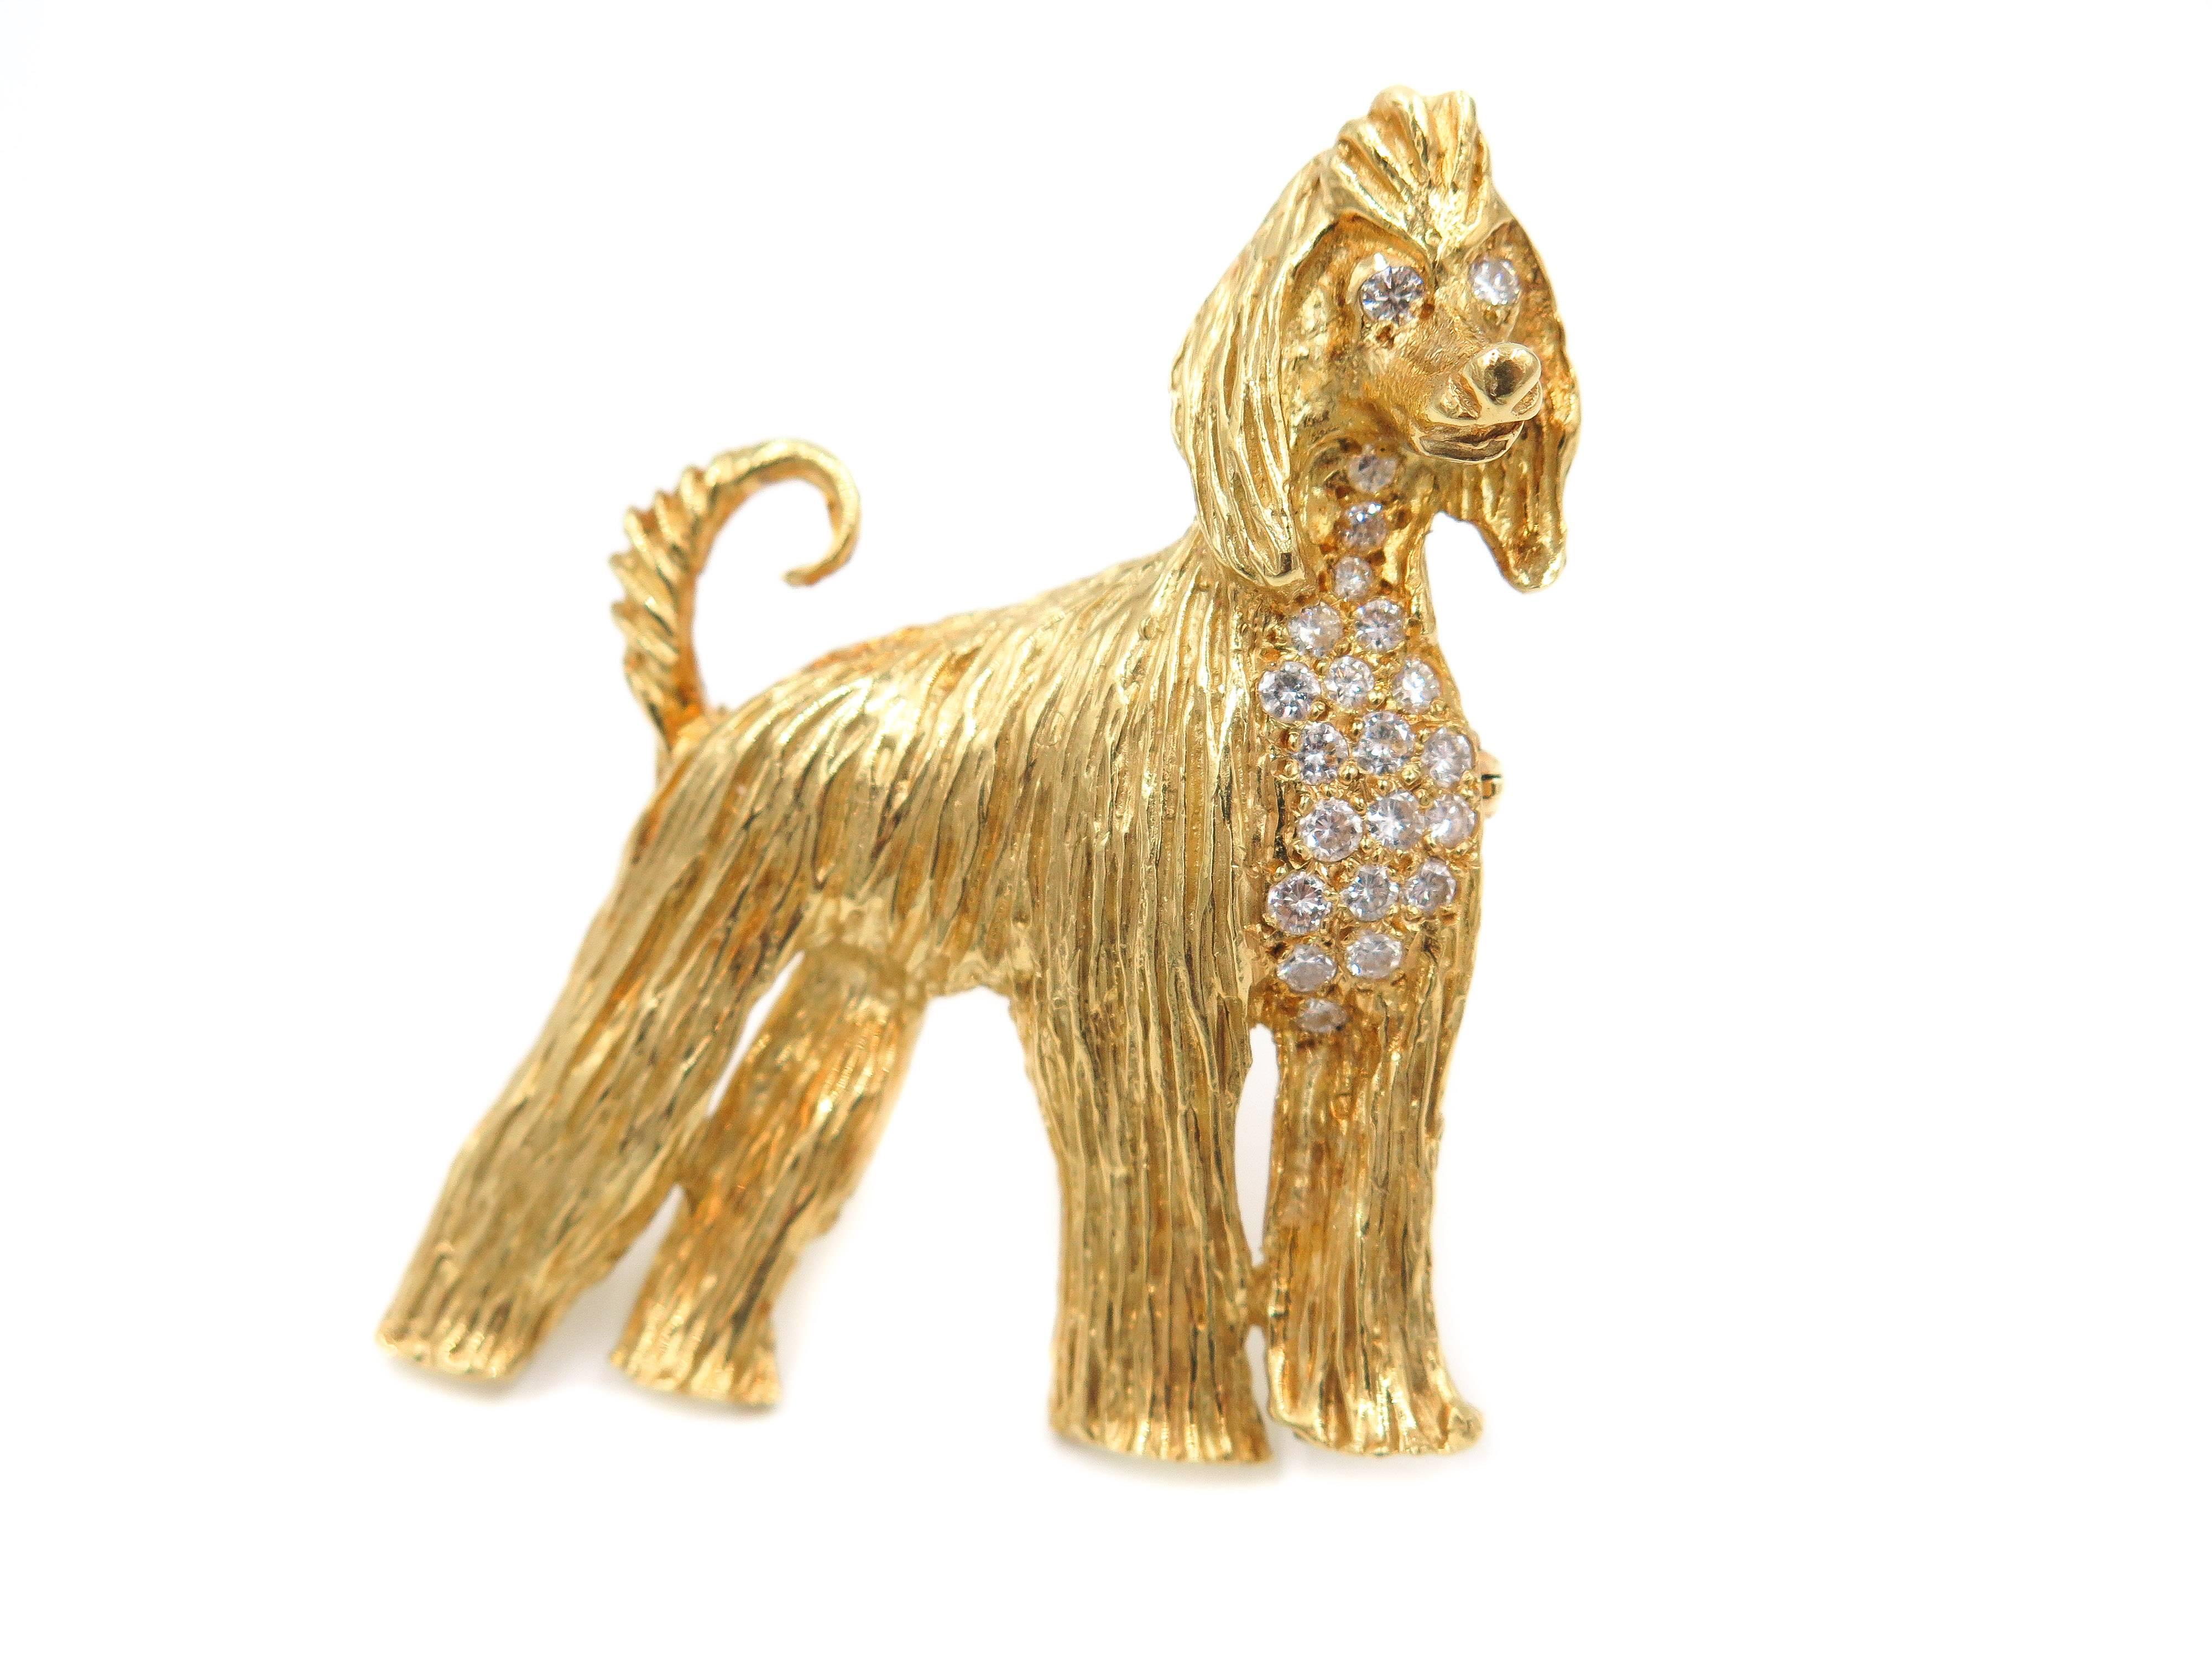 Since ancient times, Afghan Hounds have been famous for their elegant beauty and thick flowing coat as the breed's crowning glory ...accented by white brilliant diamonds this gorgeous brooch is handcrafted in 18k yellow gold.
